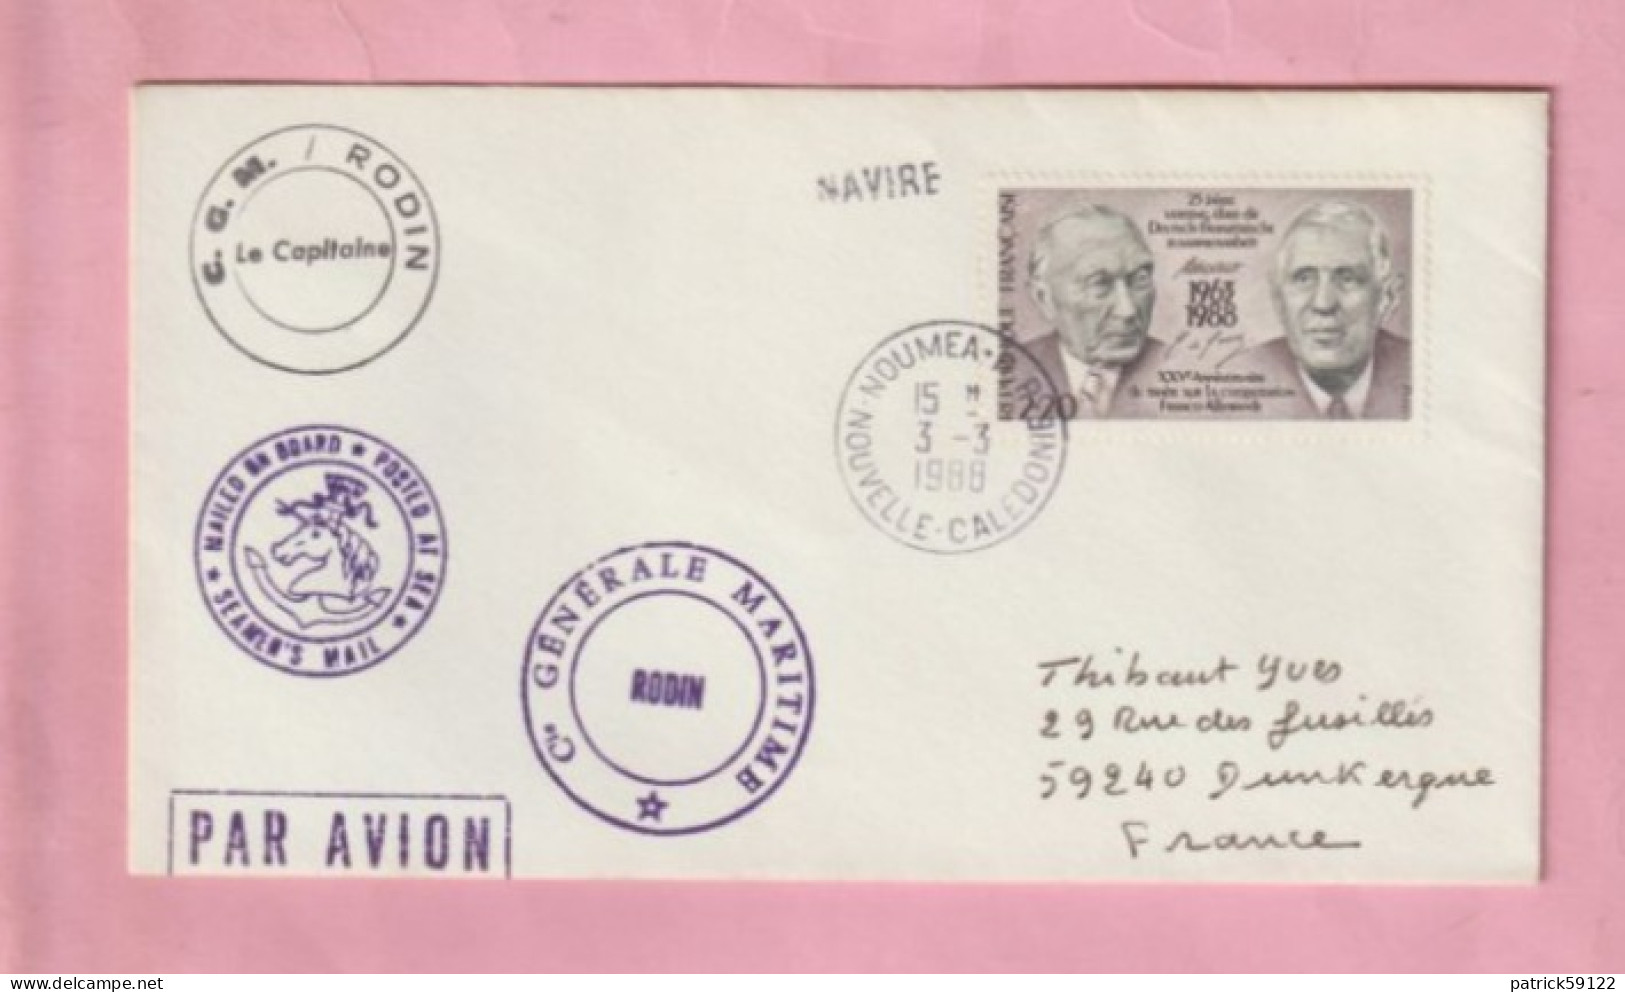 ENVELOPPE POSTED AT SEA   - C G M / COMPAGNIE GENERALE MARITIME RODIN - NOUMEA  - 1988 - Covers & Documents